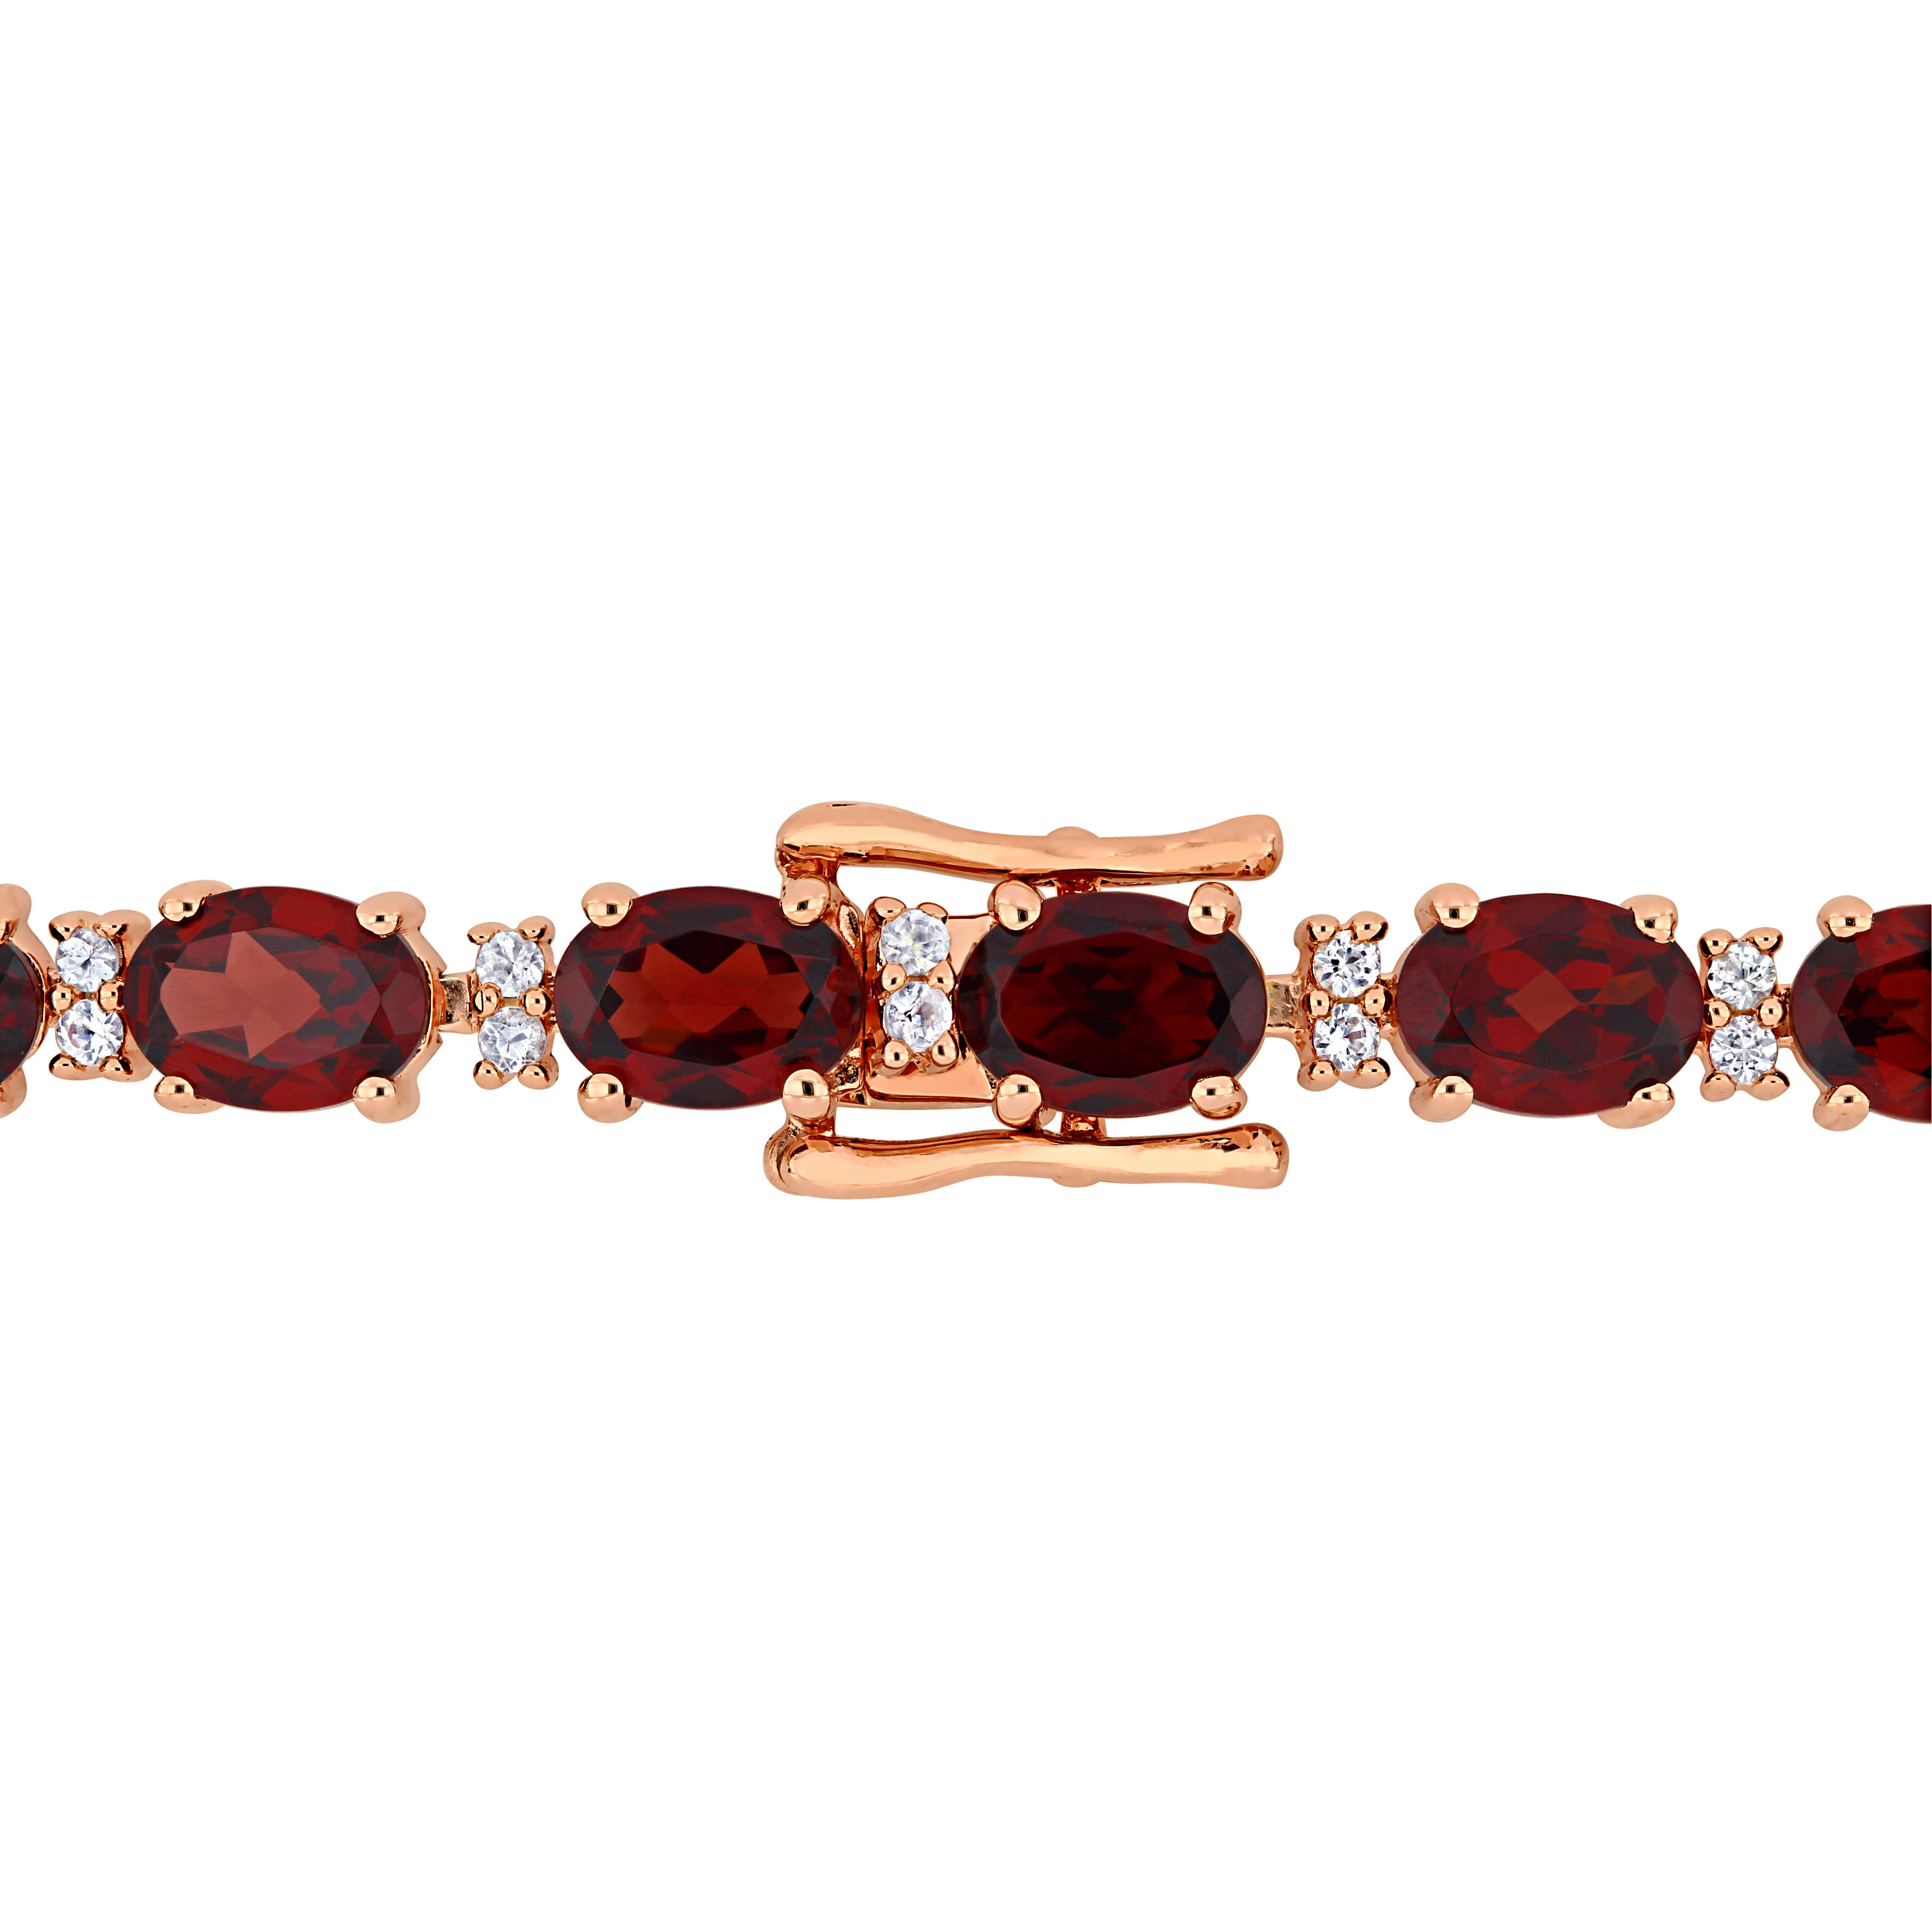 19 5/8 CT TGW Garnet and White Sapphire Tennis Bracelet in Rose Plated Sterling Silver